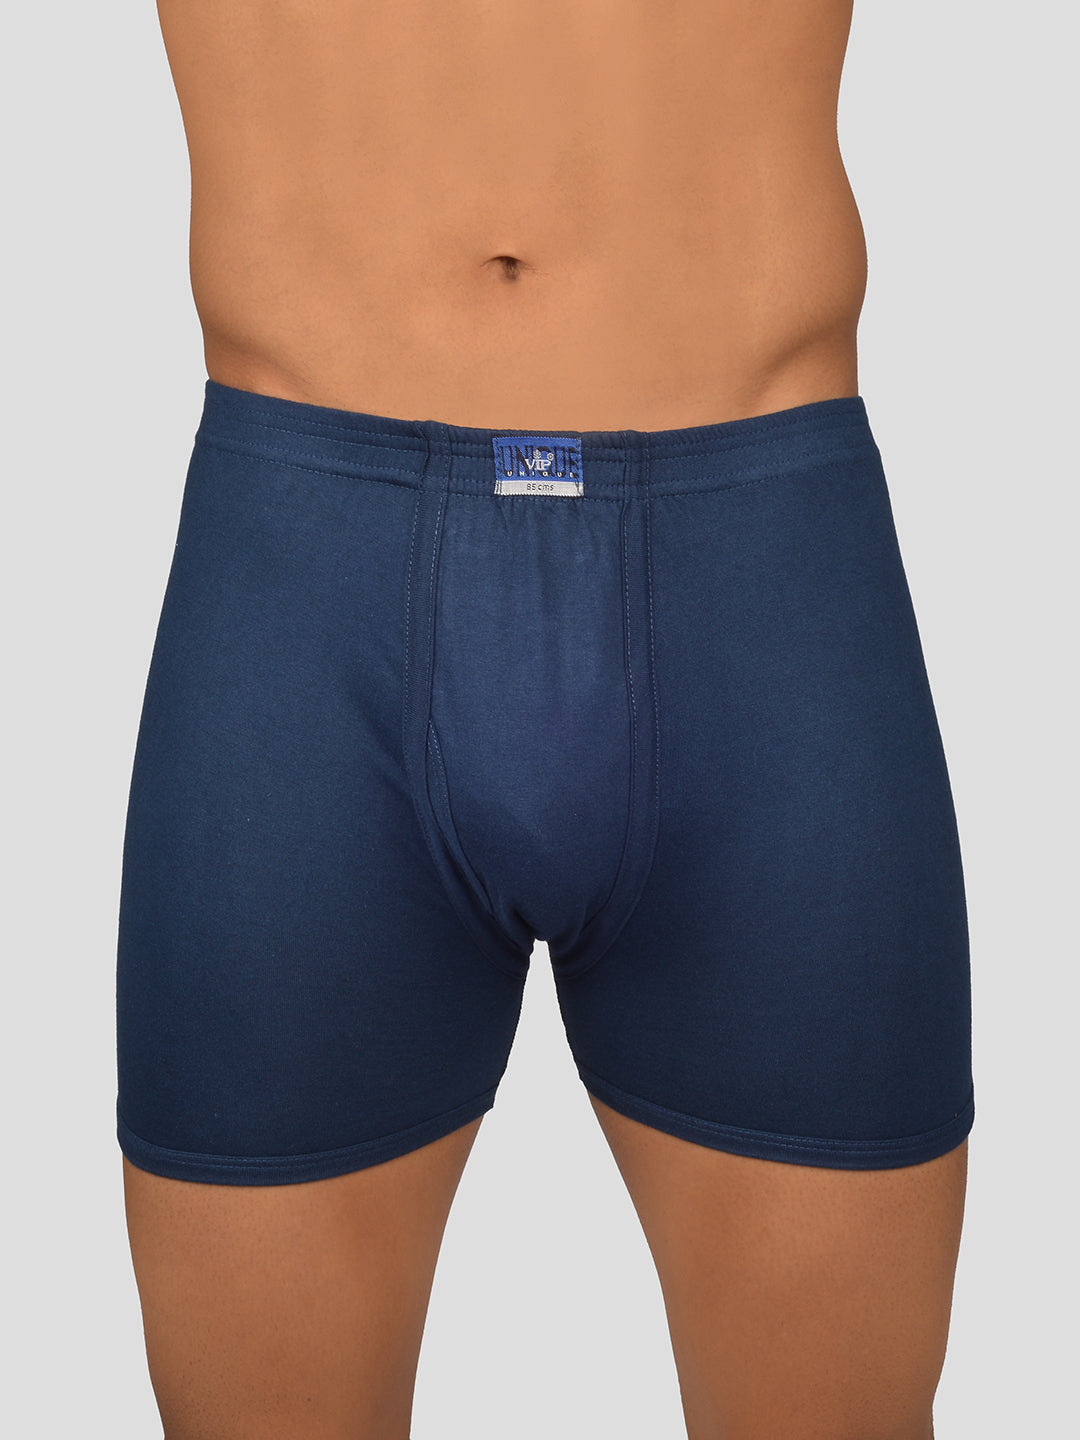 Pure Cotton Plain Pocket underwear, Type: Trunks at Rs 69/piece in  Coimbatore